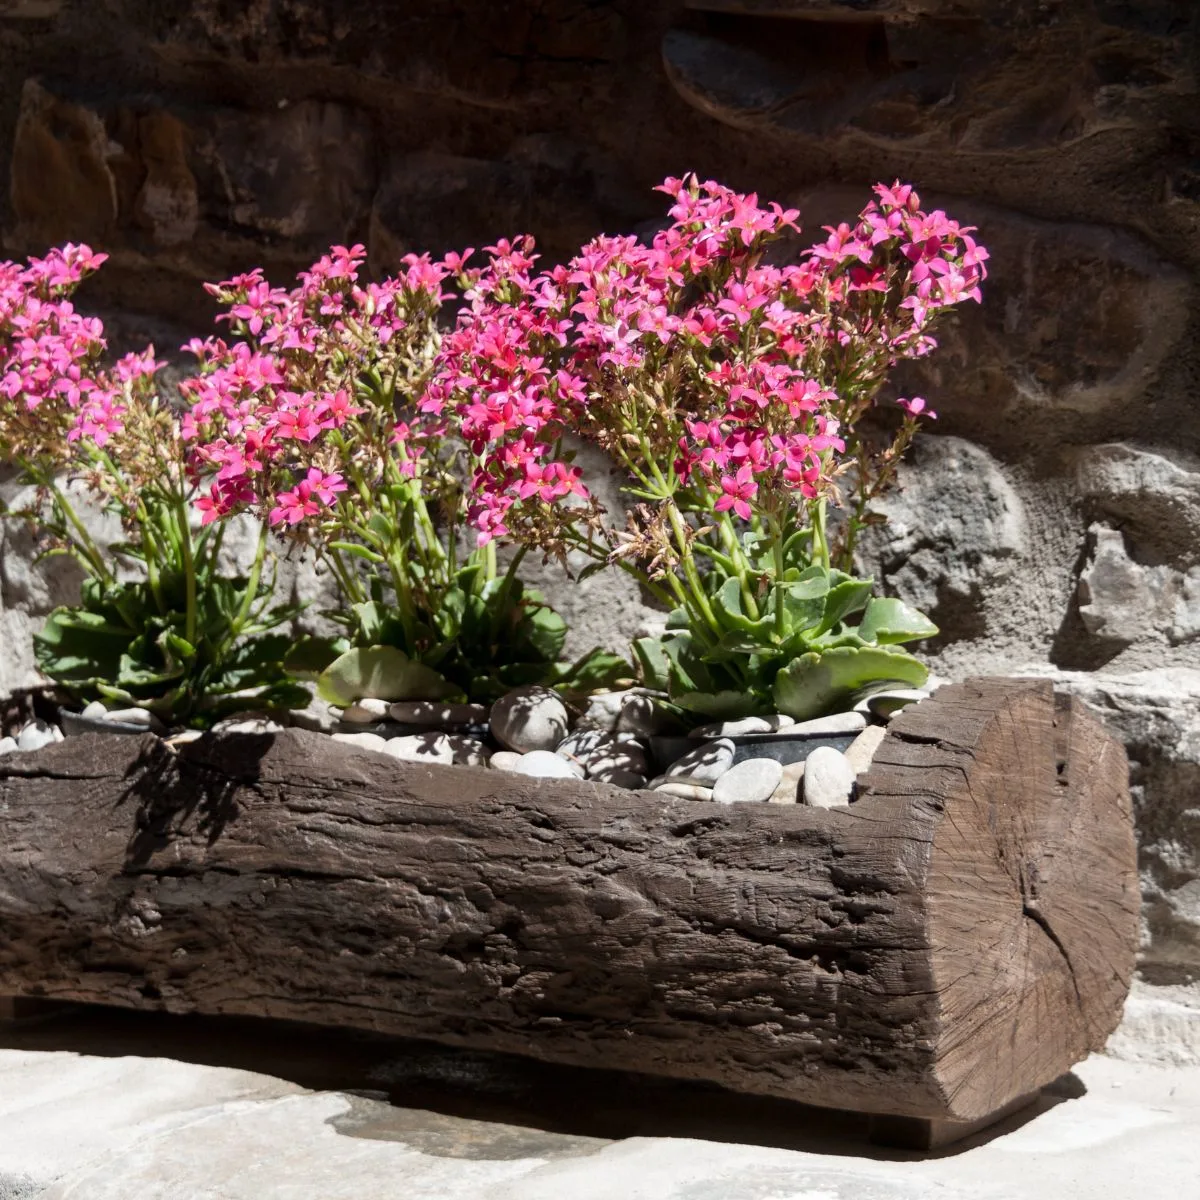 pink flowers growing in a log planter.